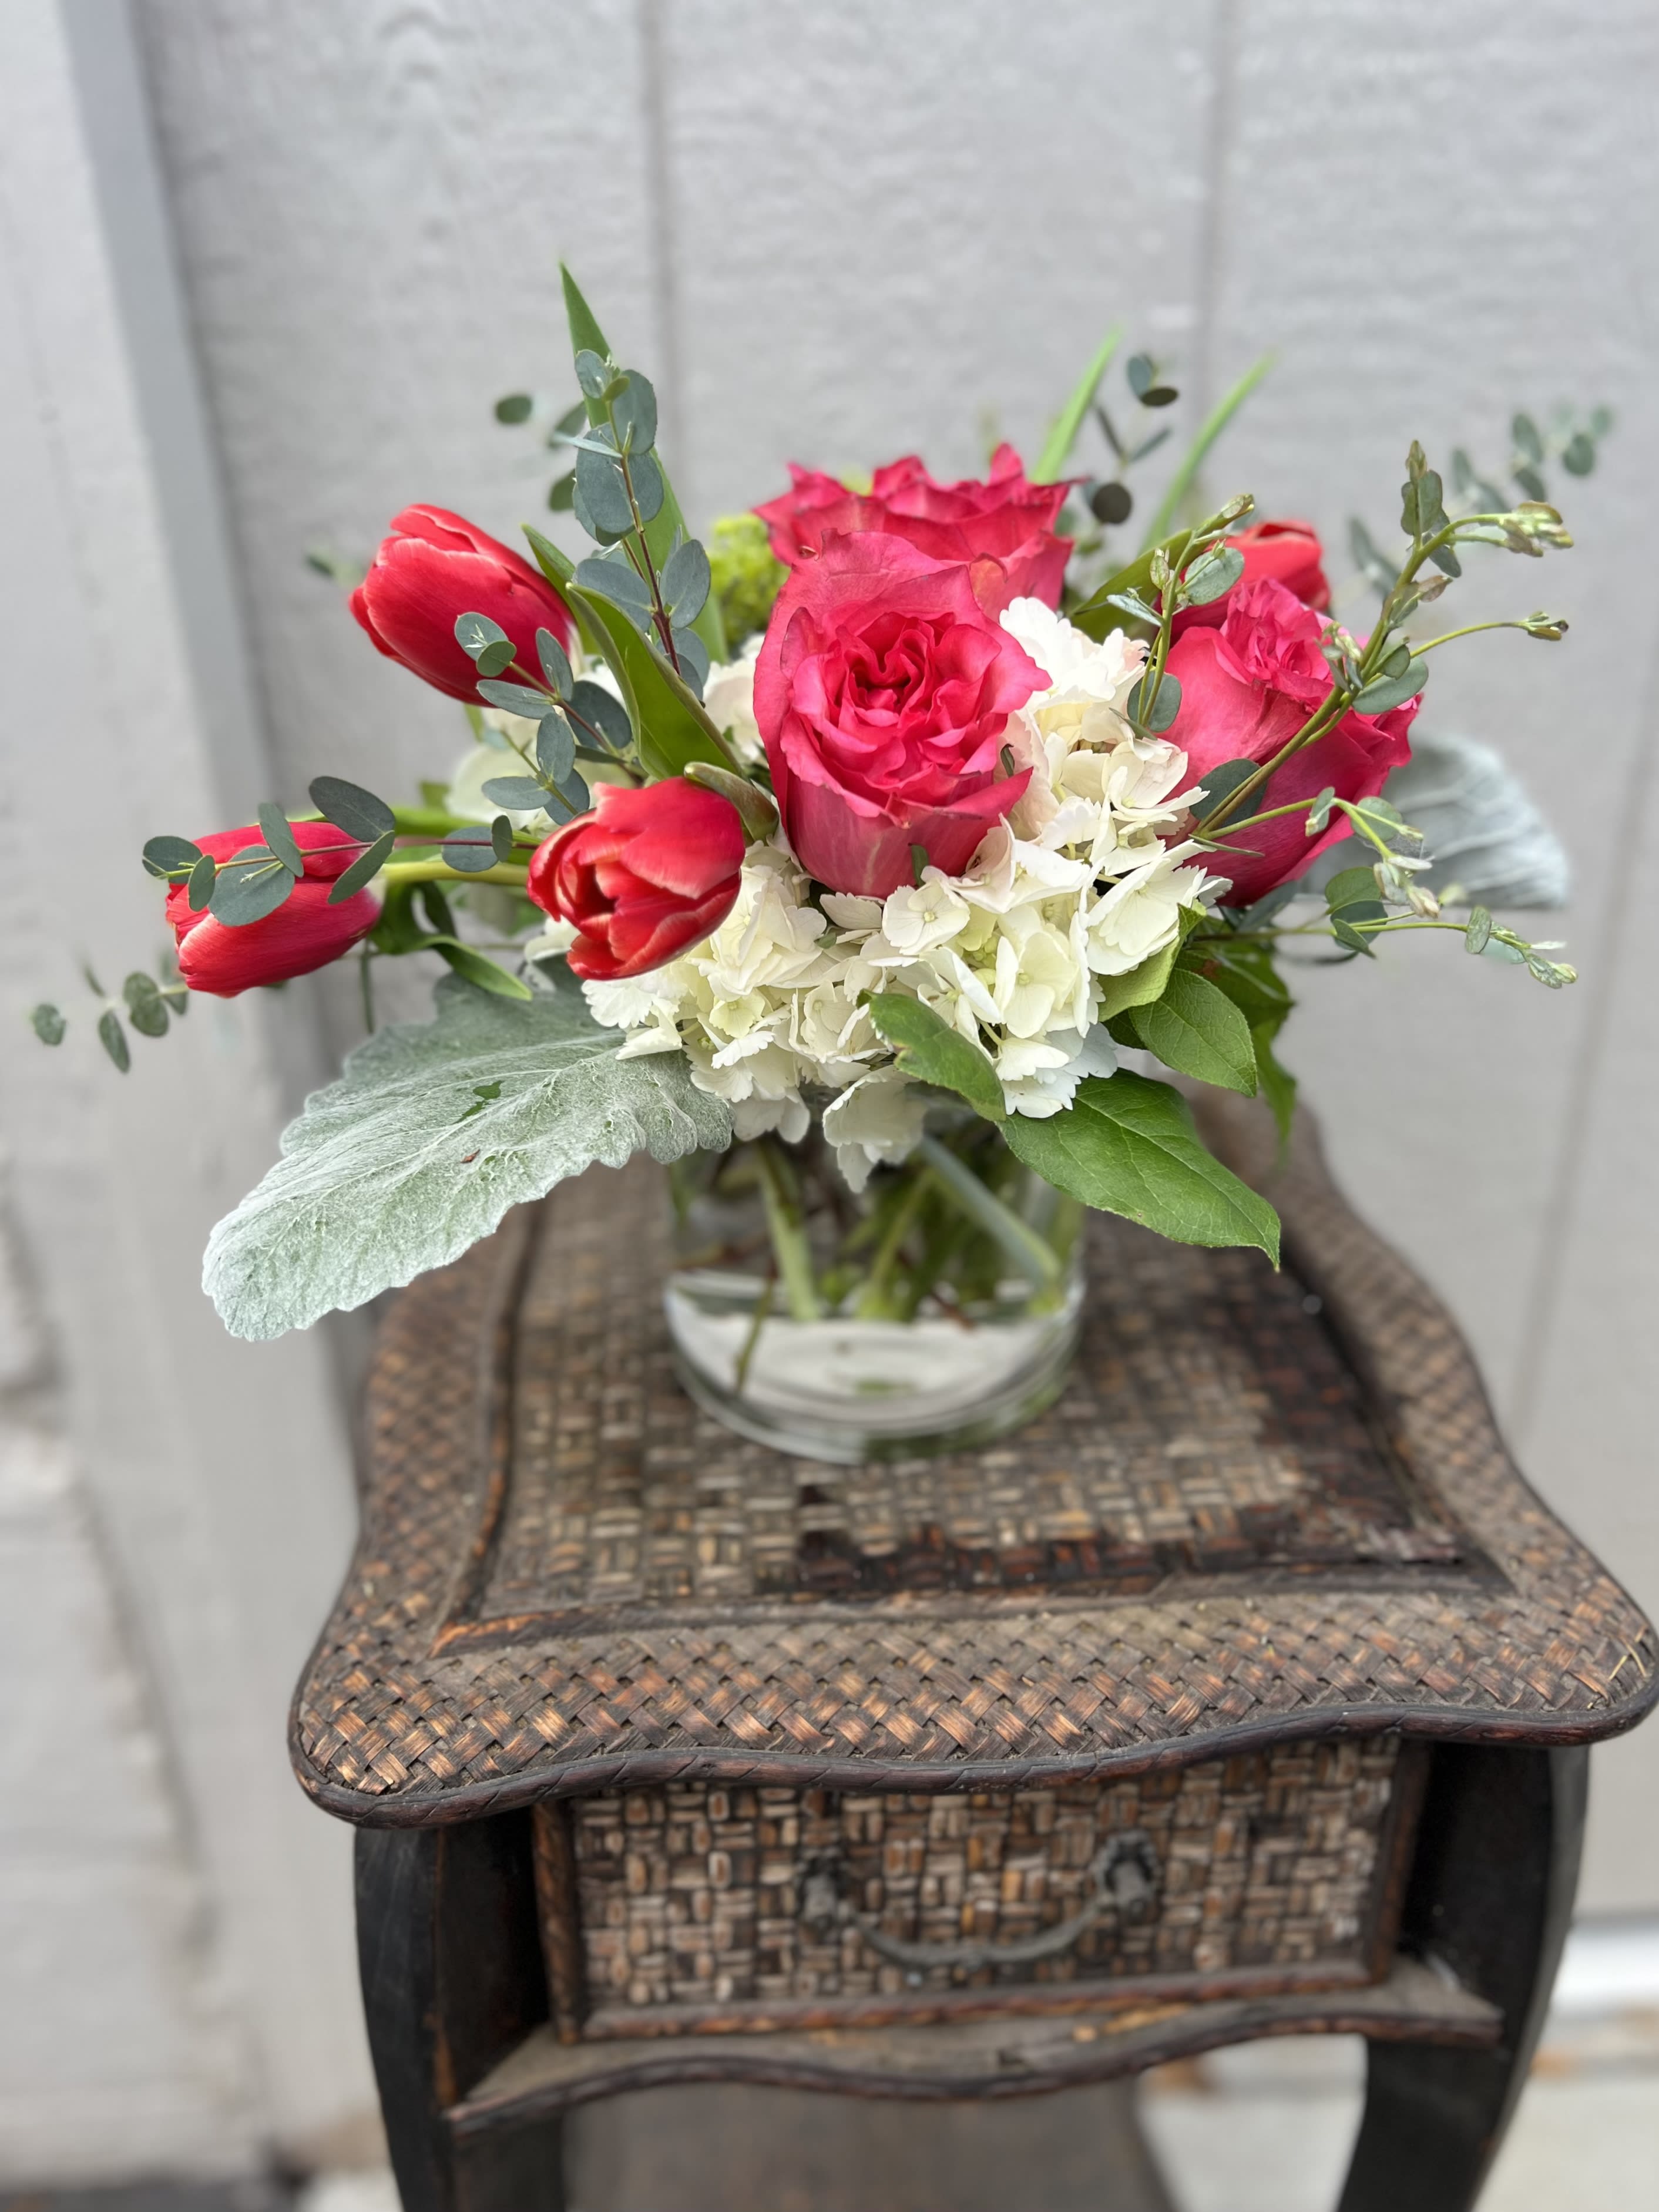 French Kiss  - A lovely arrangement containing a combination of hydrangea, roses, tulips and greenery. 